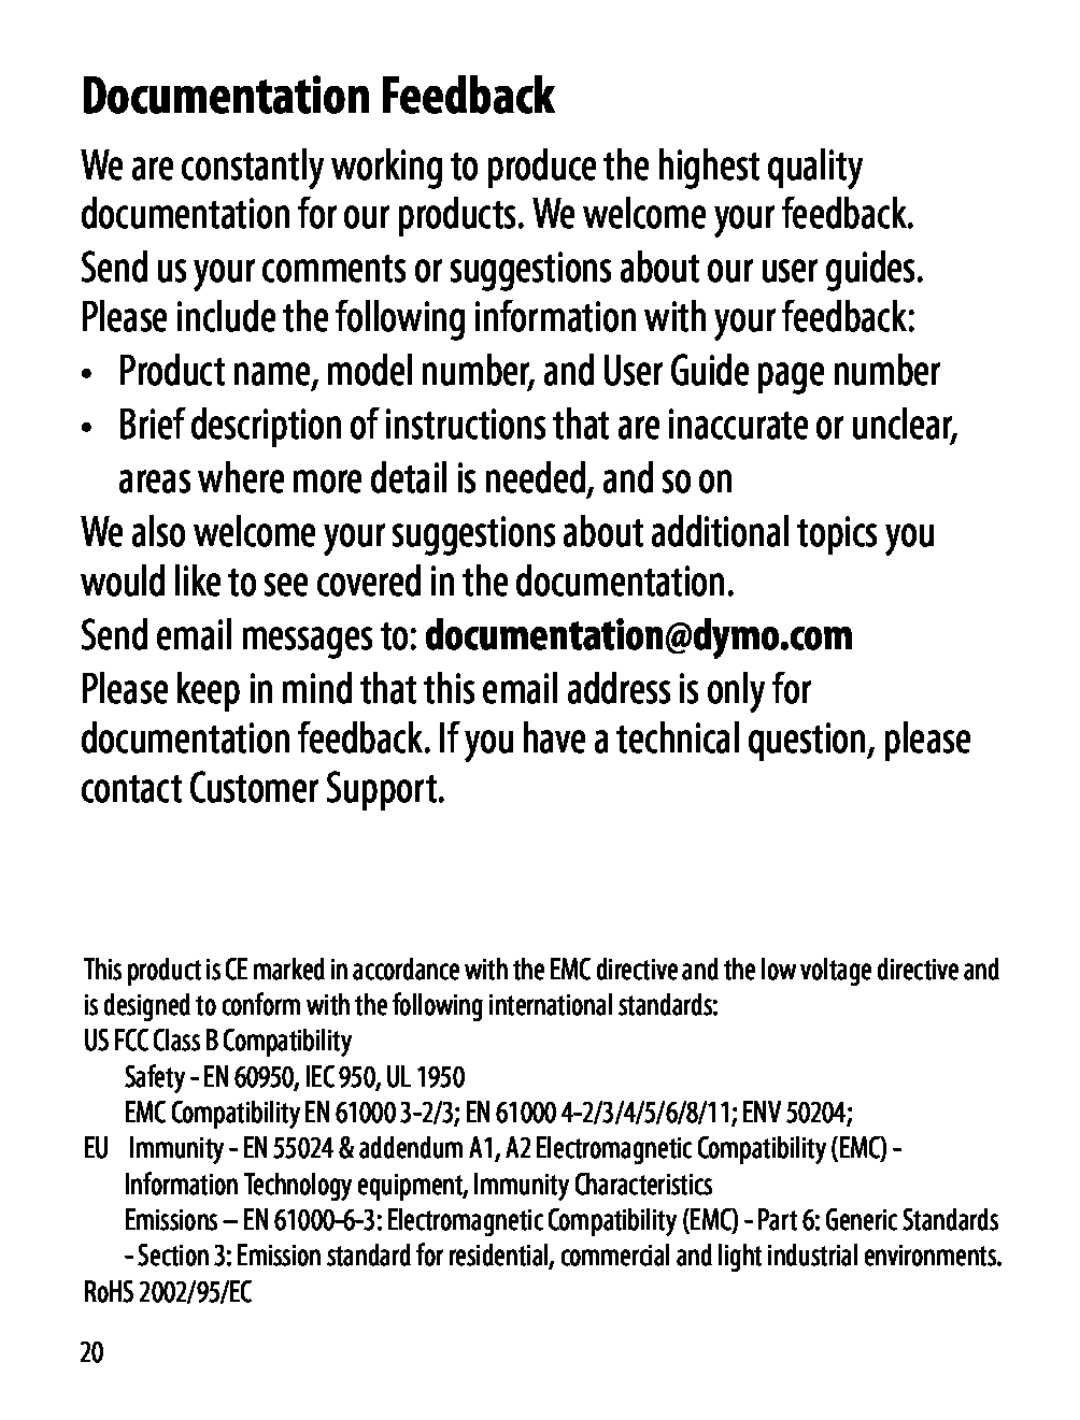 Dymo Labelmaker manual Documentation Feedback, Product name, model number, and User Guide page number 